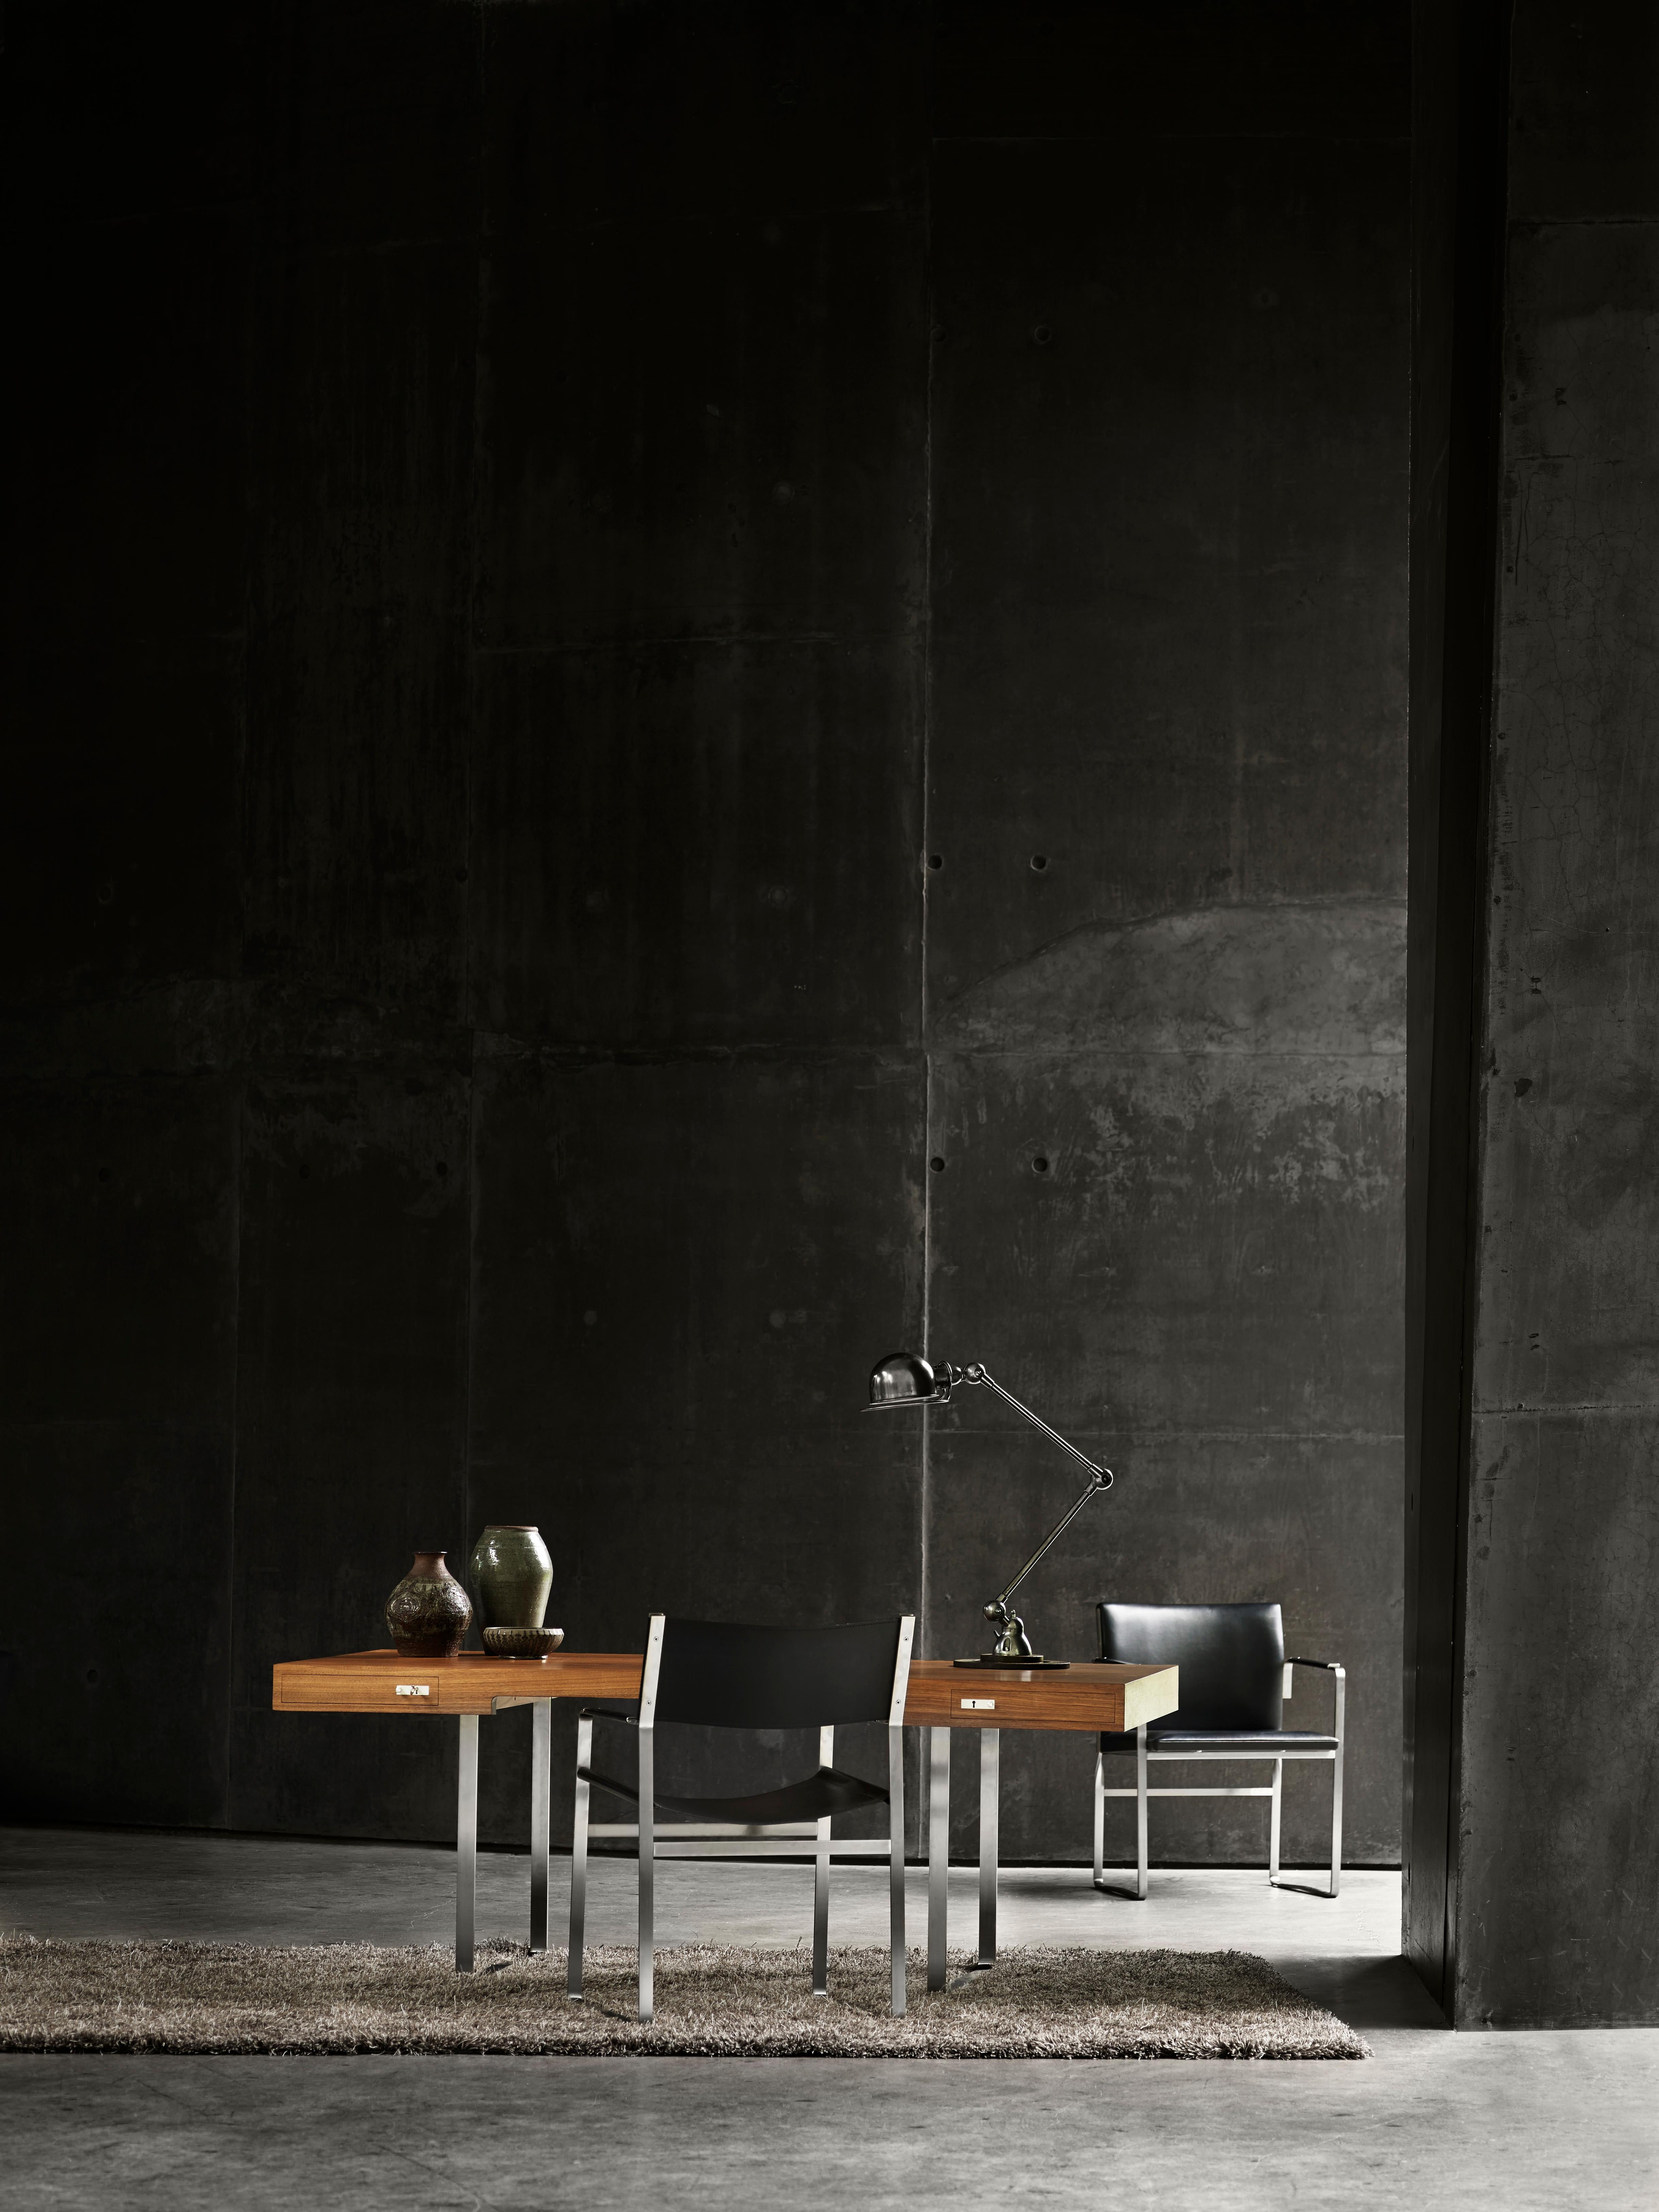 The CH111 chair designed by Hans J. Wegner is part of a series of significant furniture with a frame in flat stainless steel and seats and backs upholstered in leather. The chair’s subtle strength and clean and simple lines are the essence of